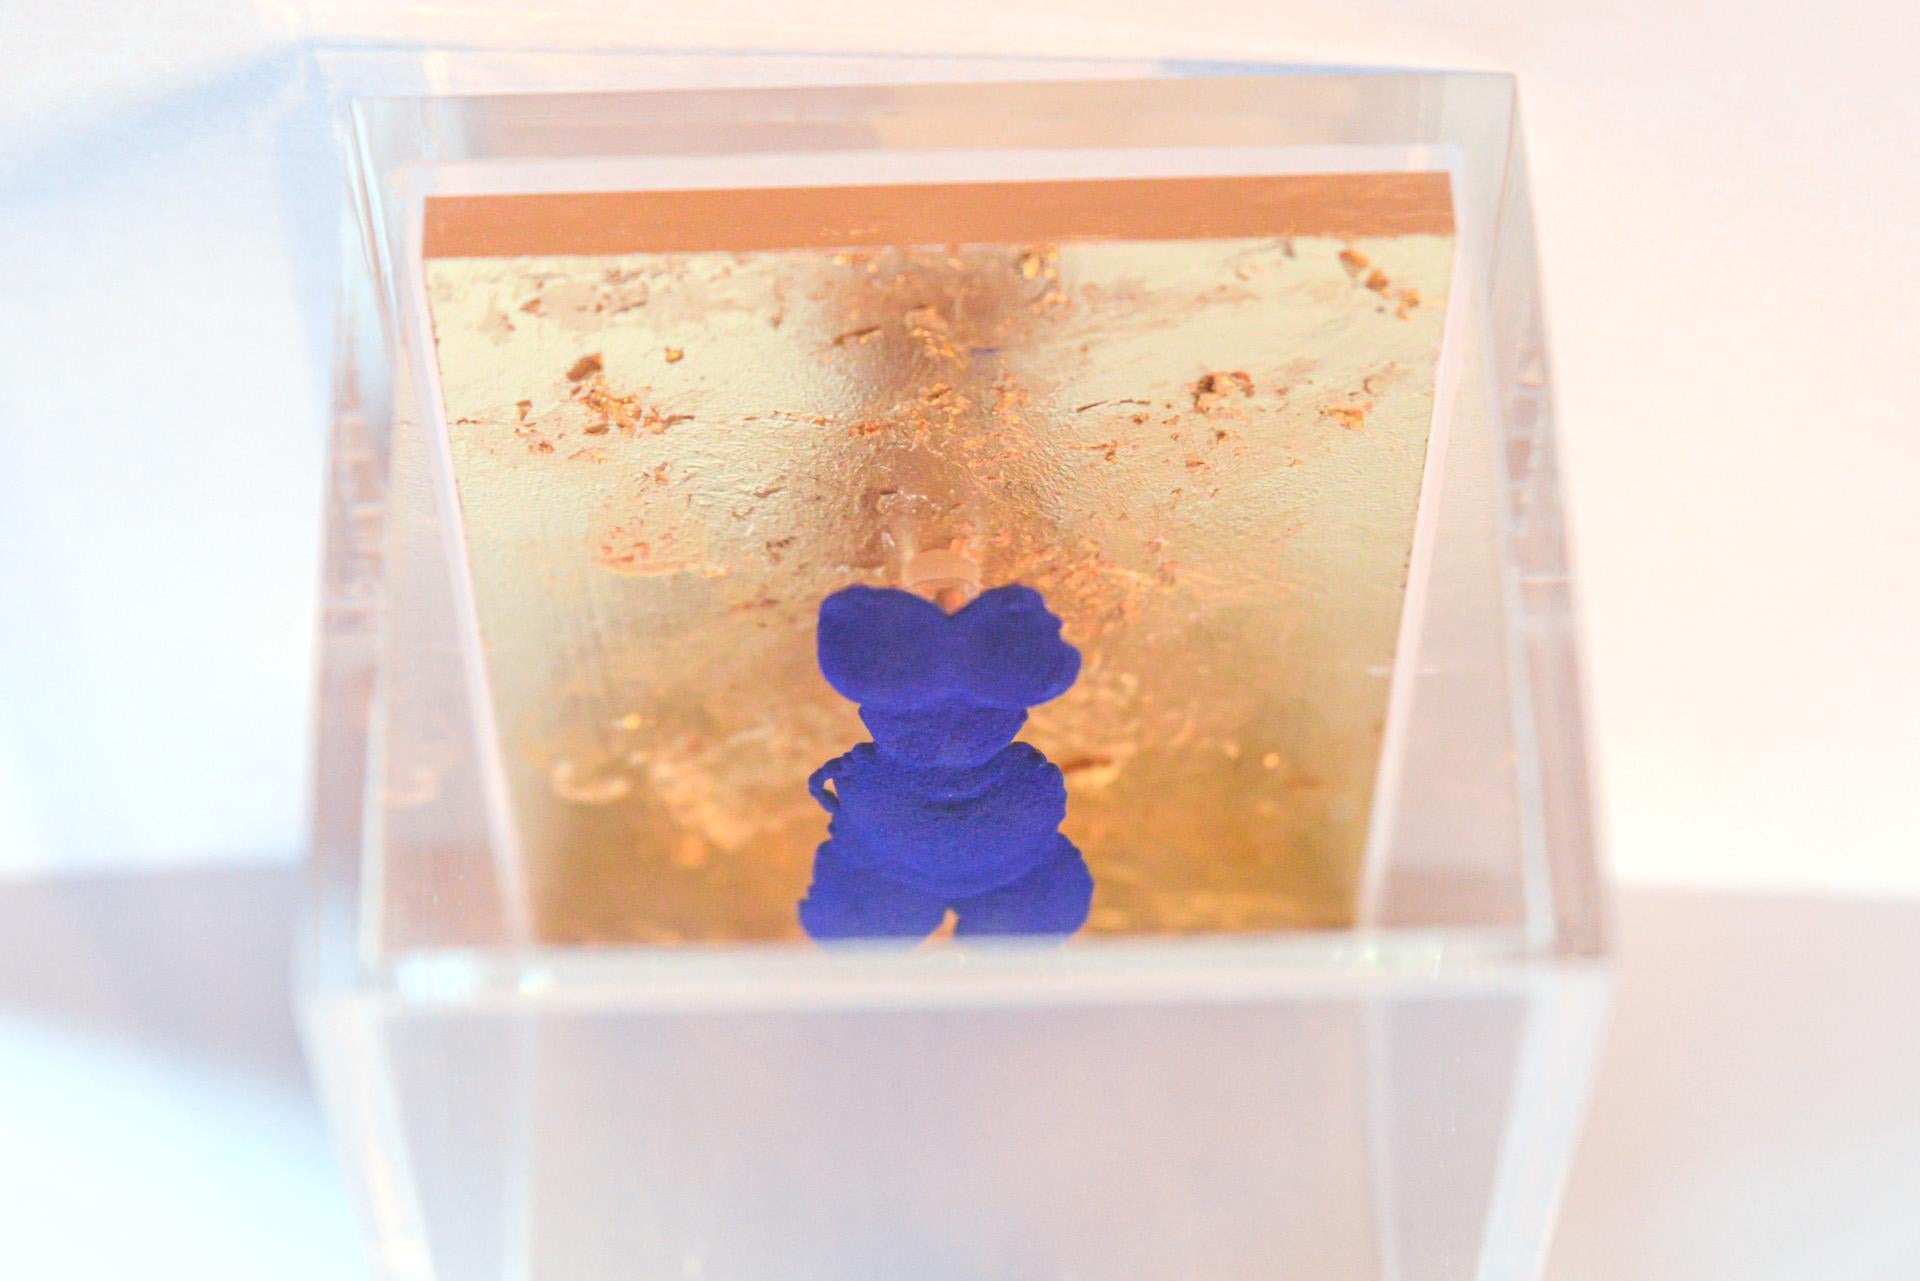 French Yves Klein, Jewel Sculpture 